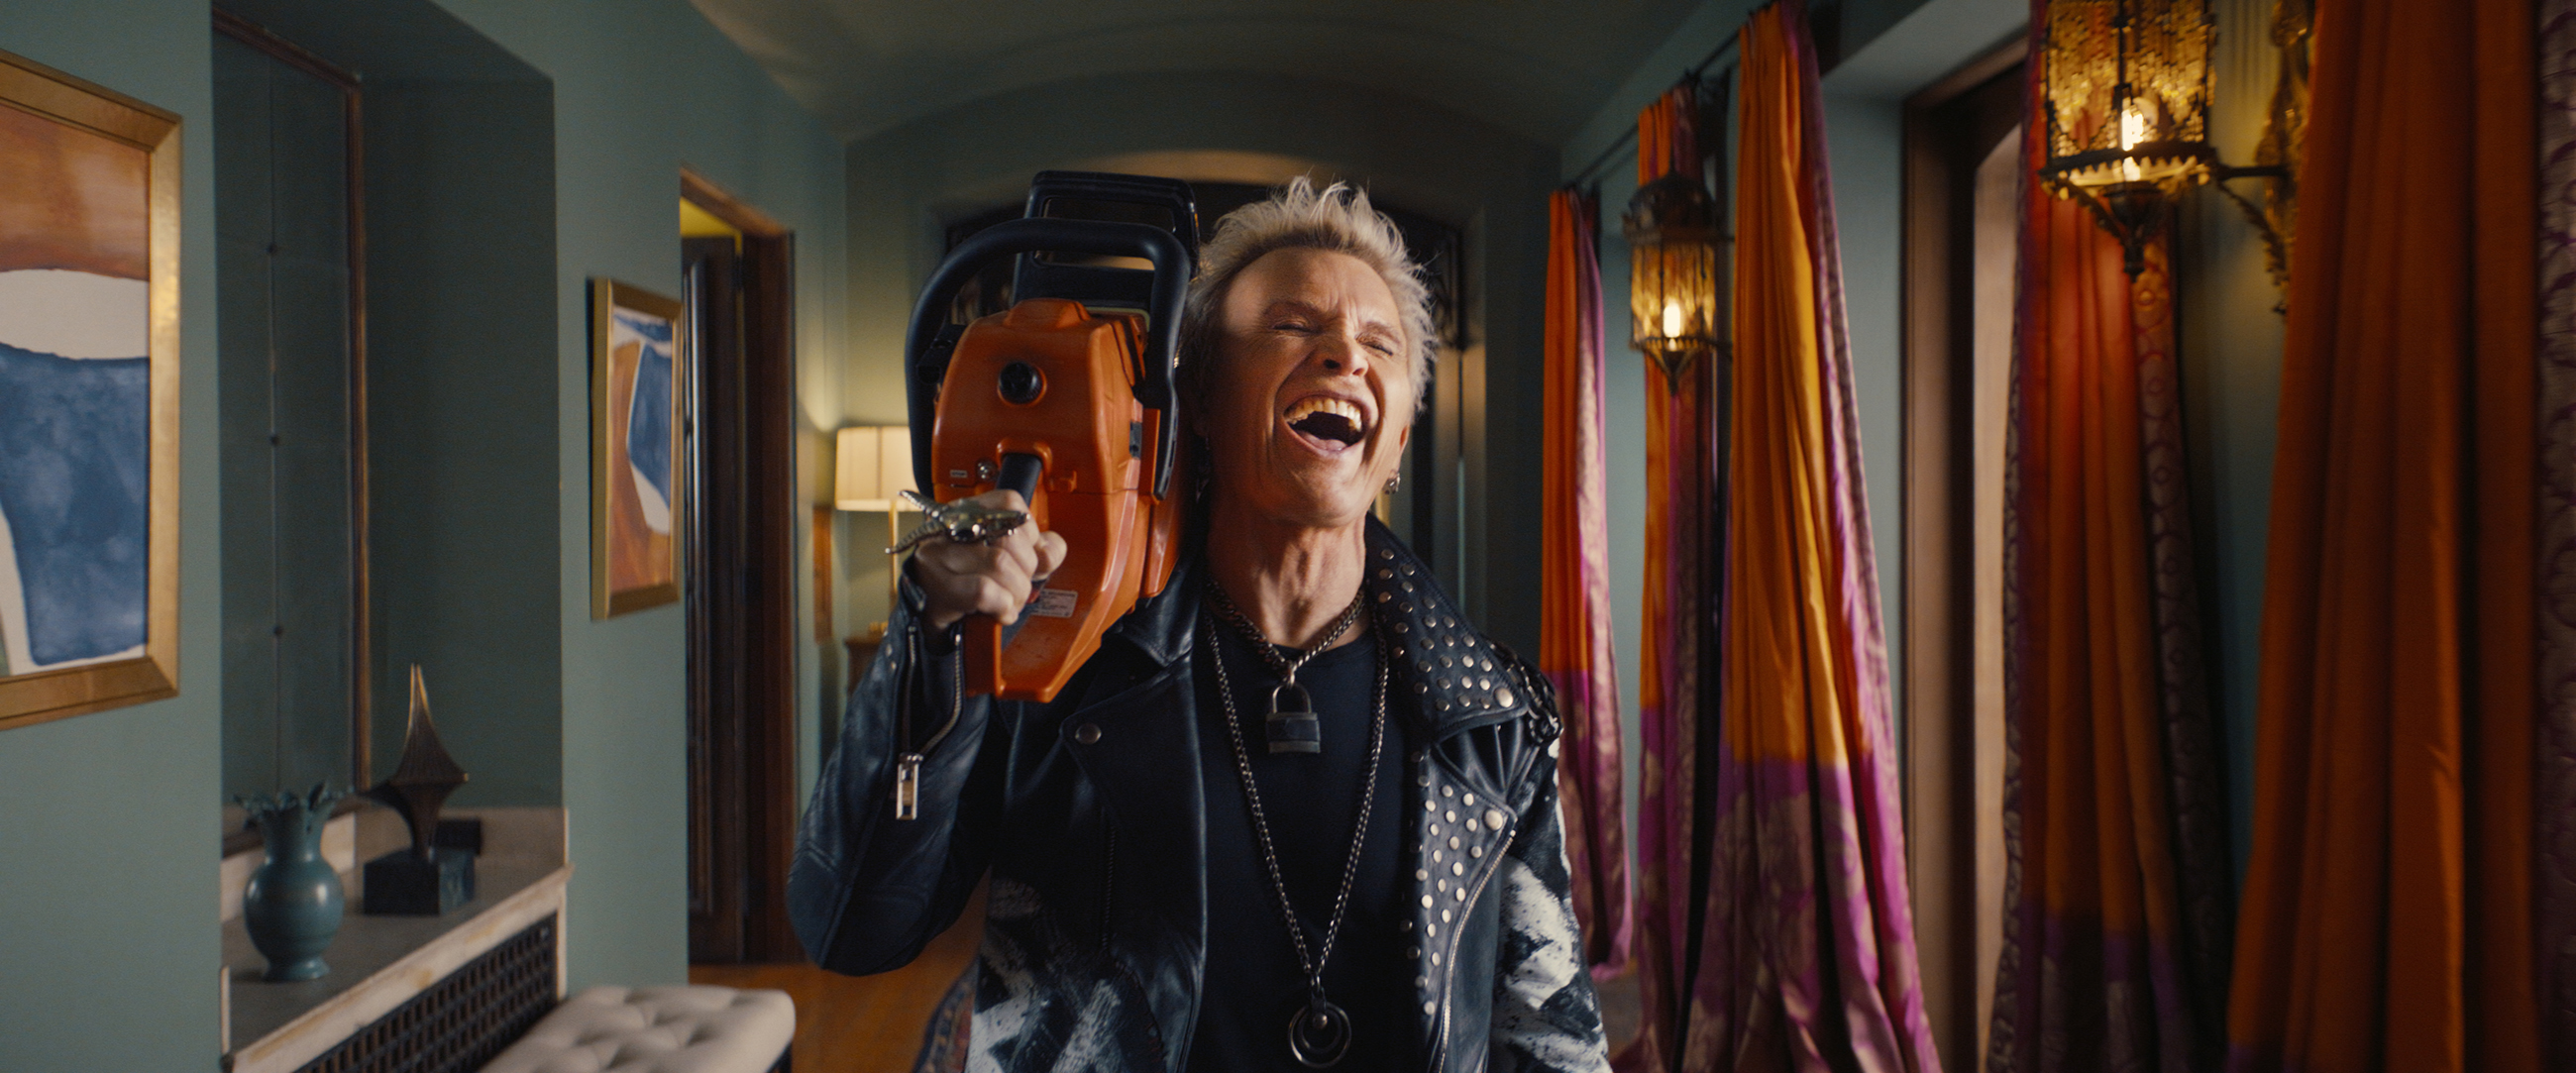 Chainsaw wielding punk rock icon Billy Idol reminds viewers he has trashed hotel rooms in 43 countries. Courtesy: Workday